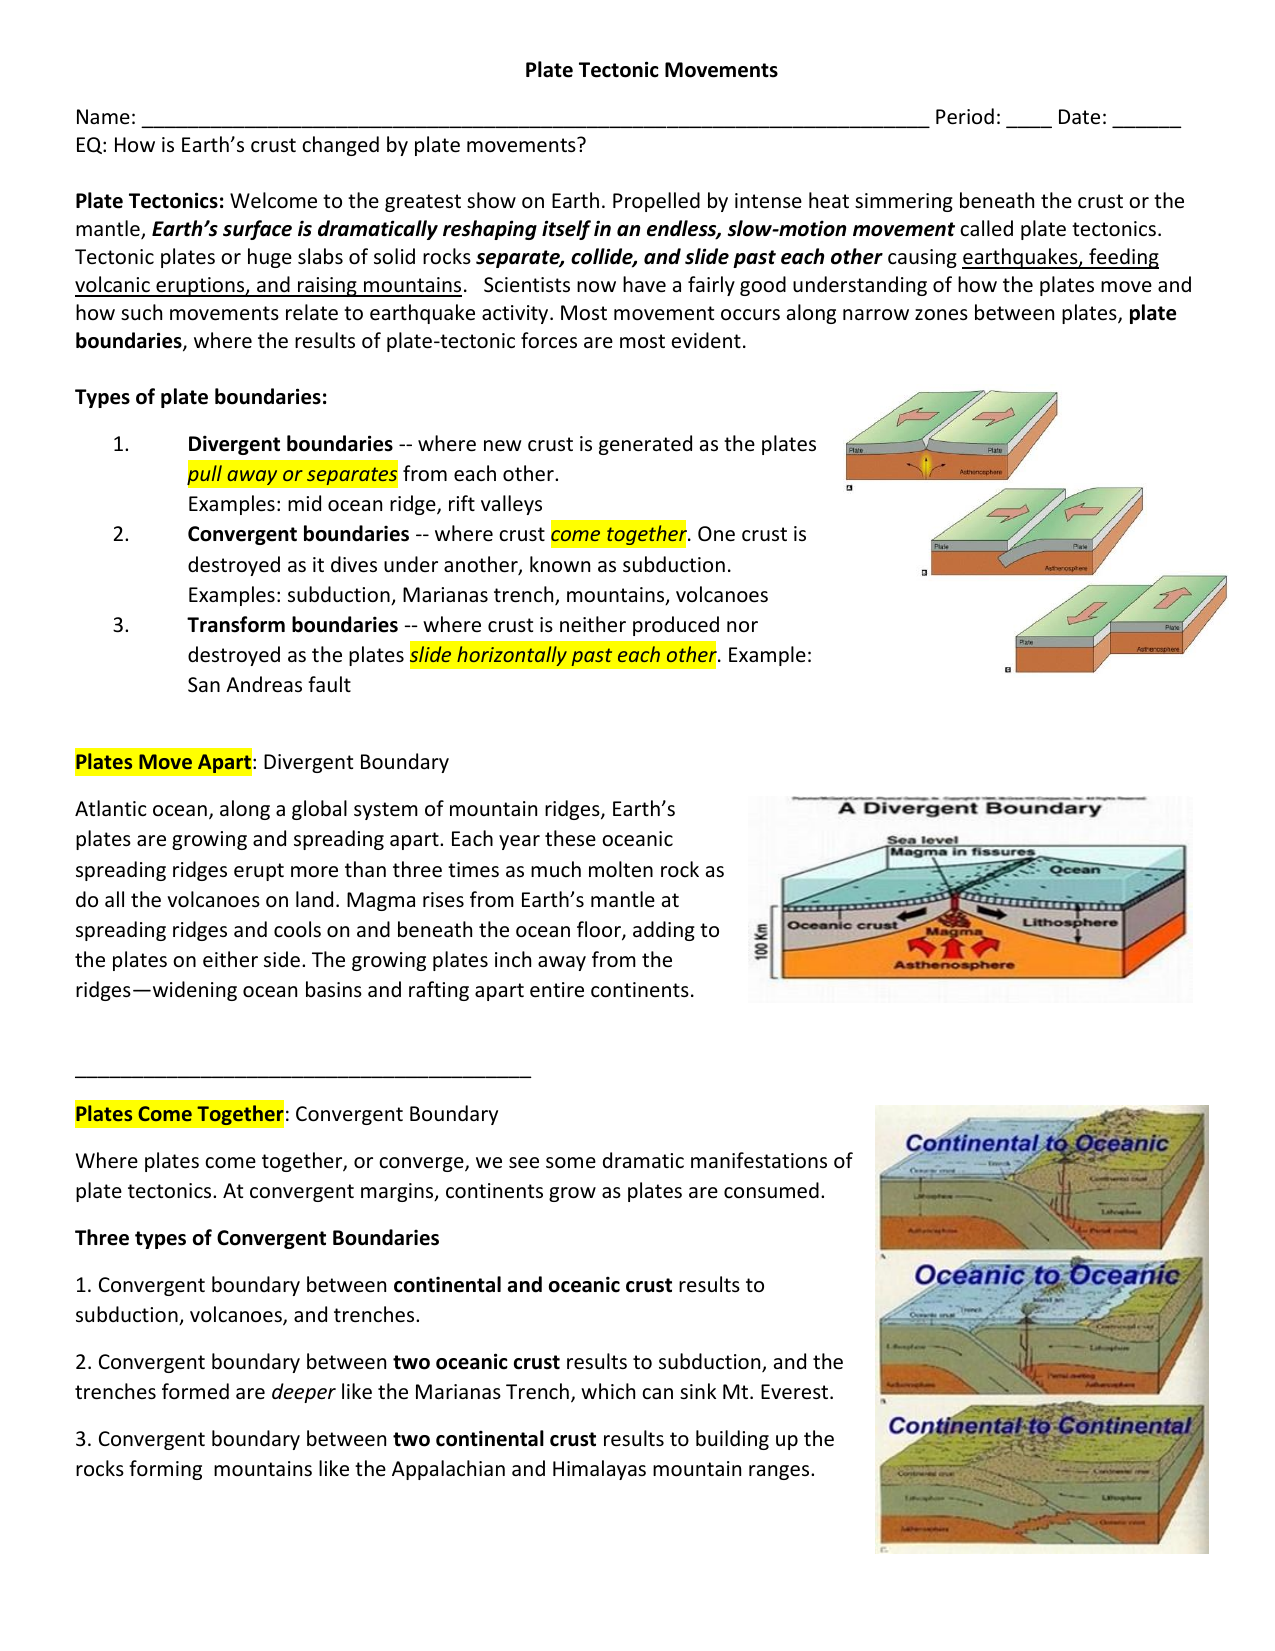 essay questions about plate tectonics